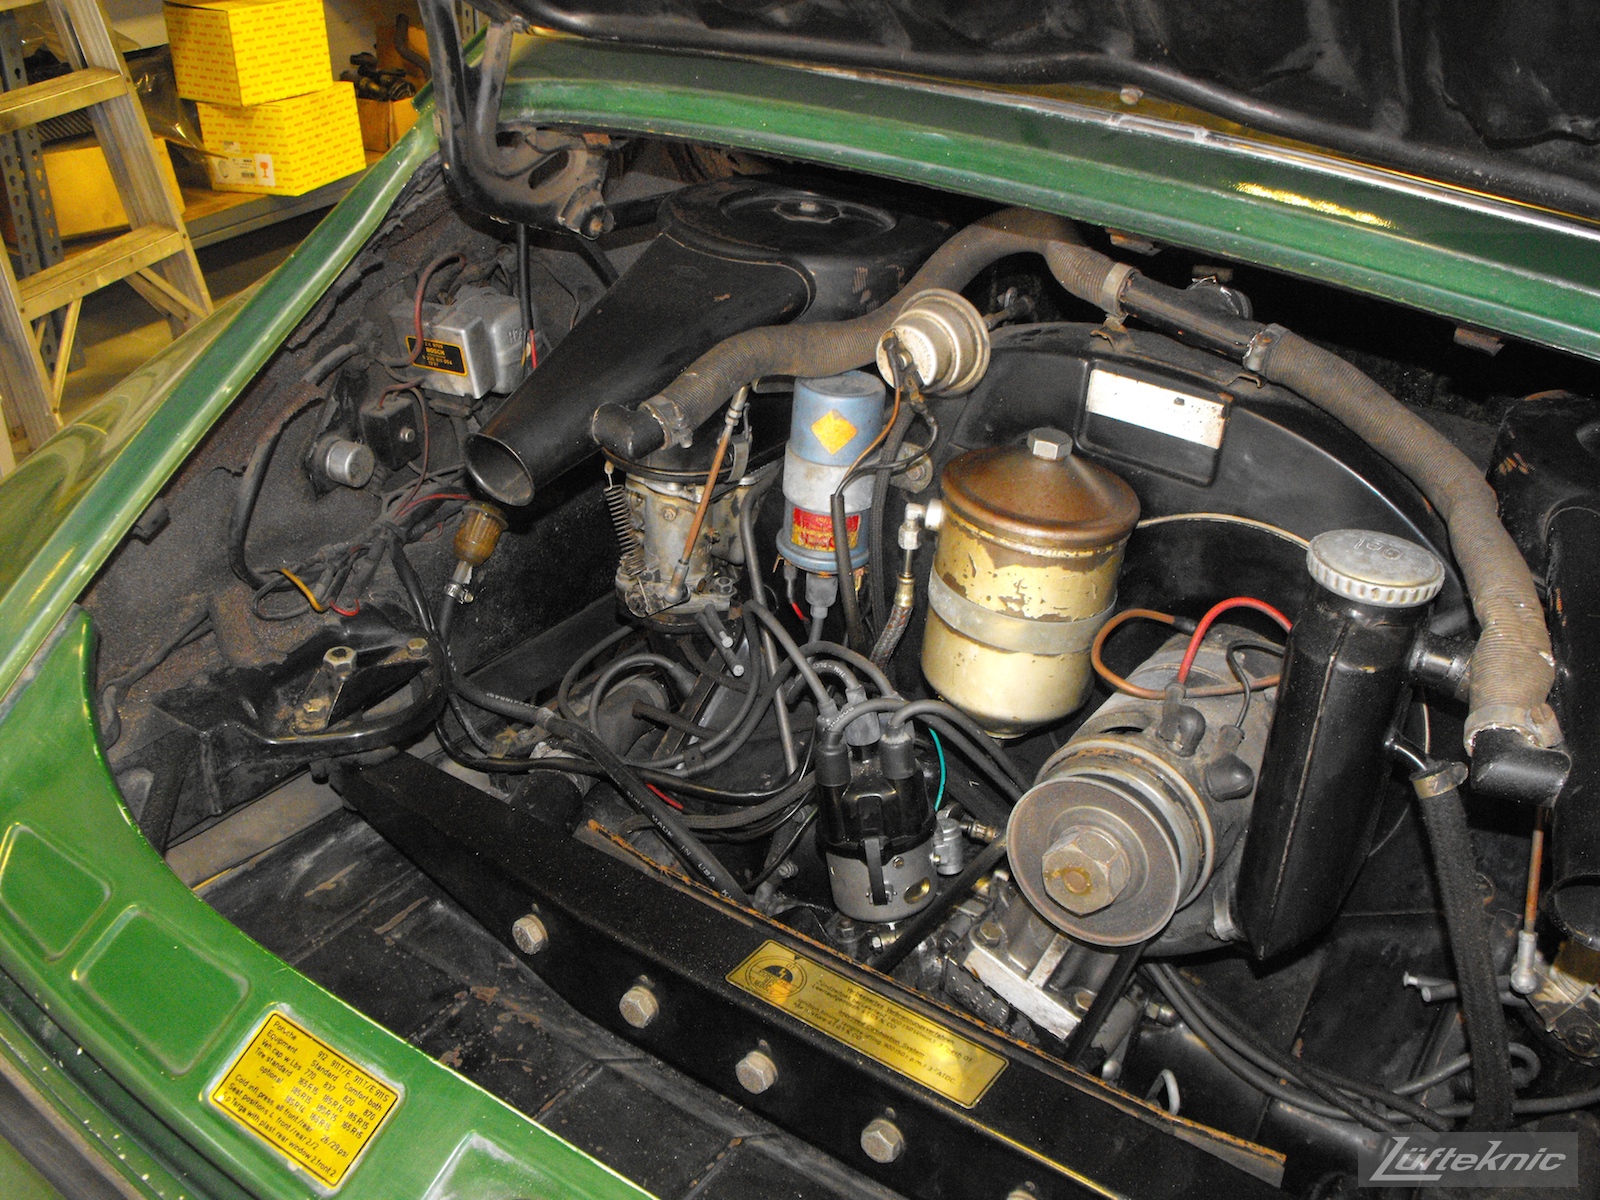 An overall picture of the engine bay of an Irish Green Porsche 912 undergoing restoration at Lufteknic.